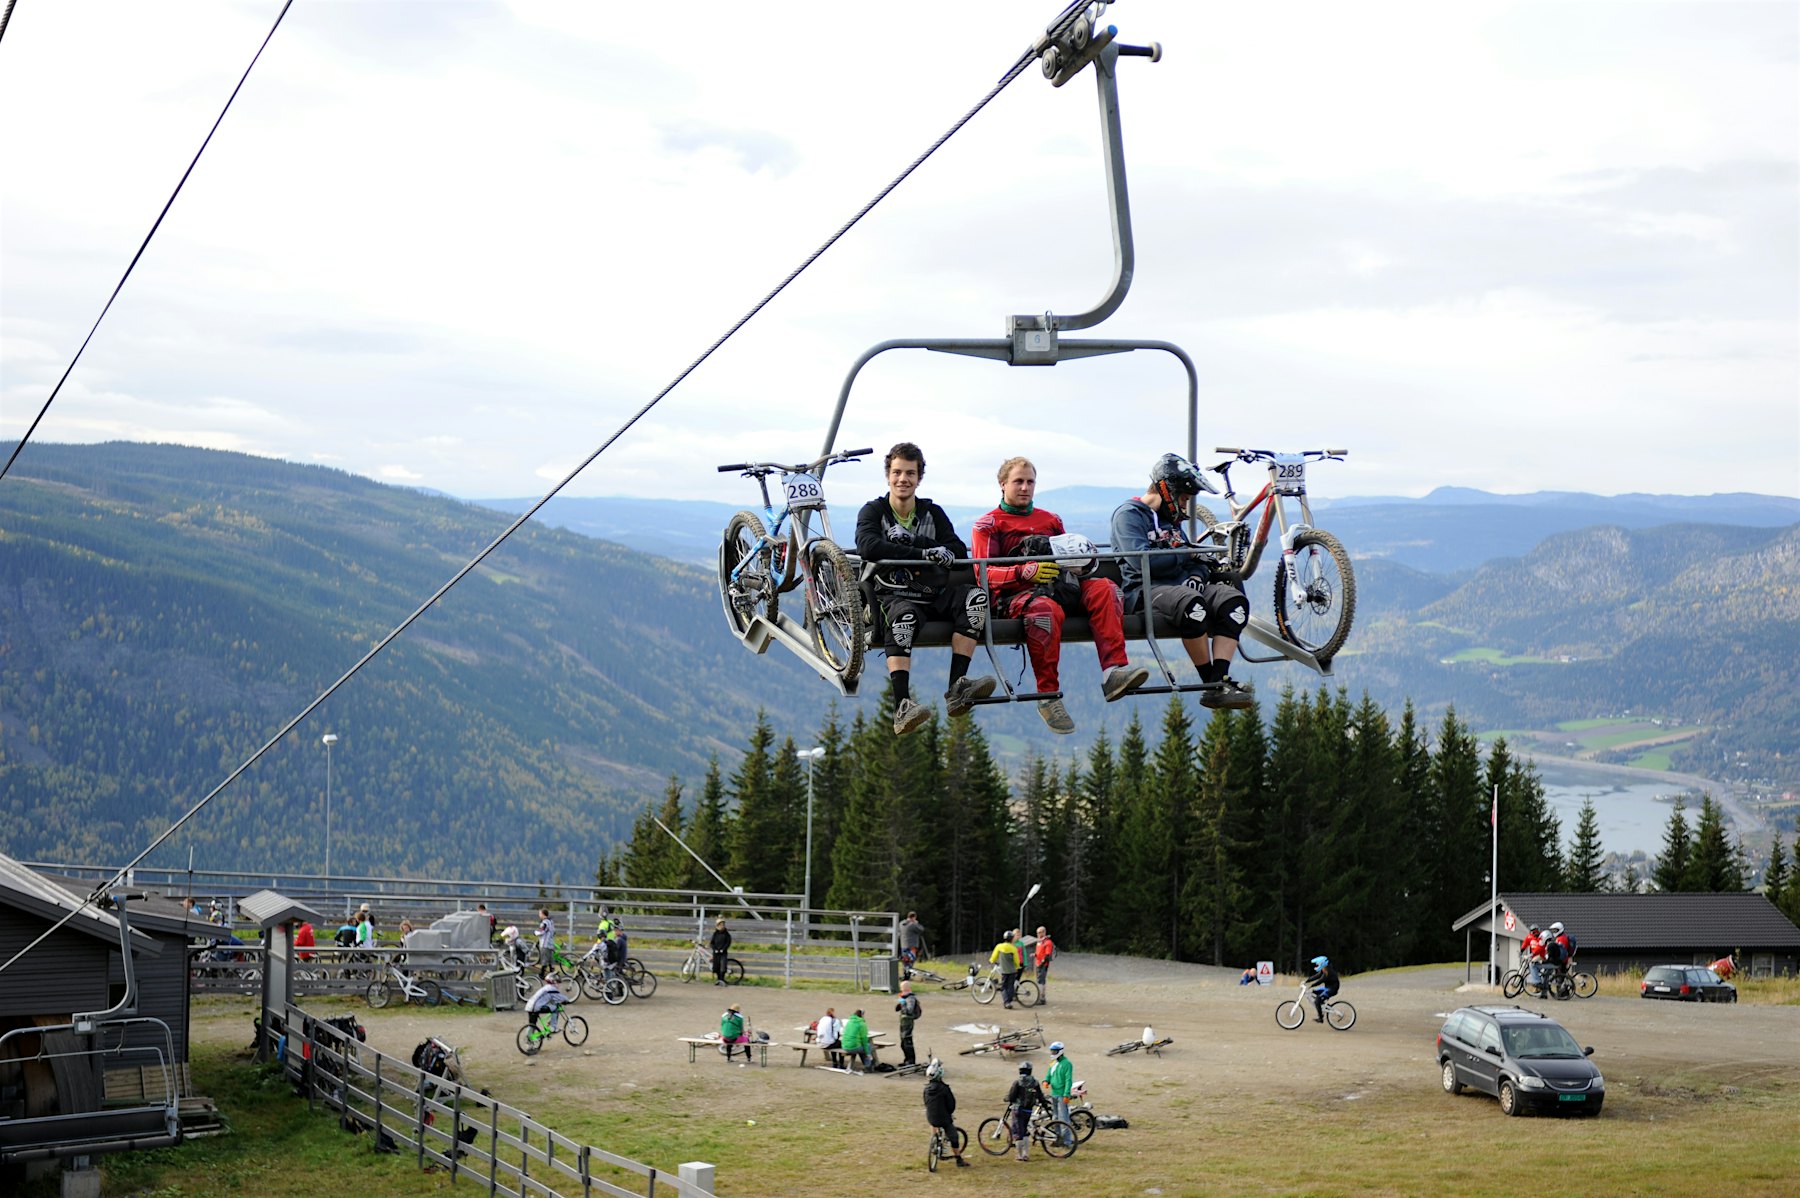 Three cyclists sit in a chairlift with their bikes, several cyclists on the ground below, mountains in the background. Photo